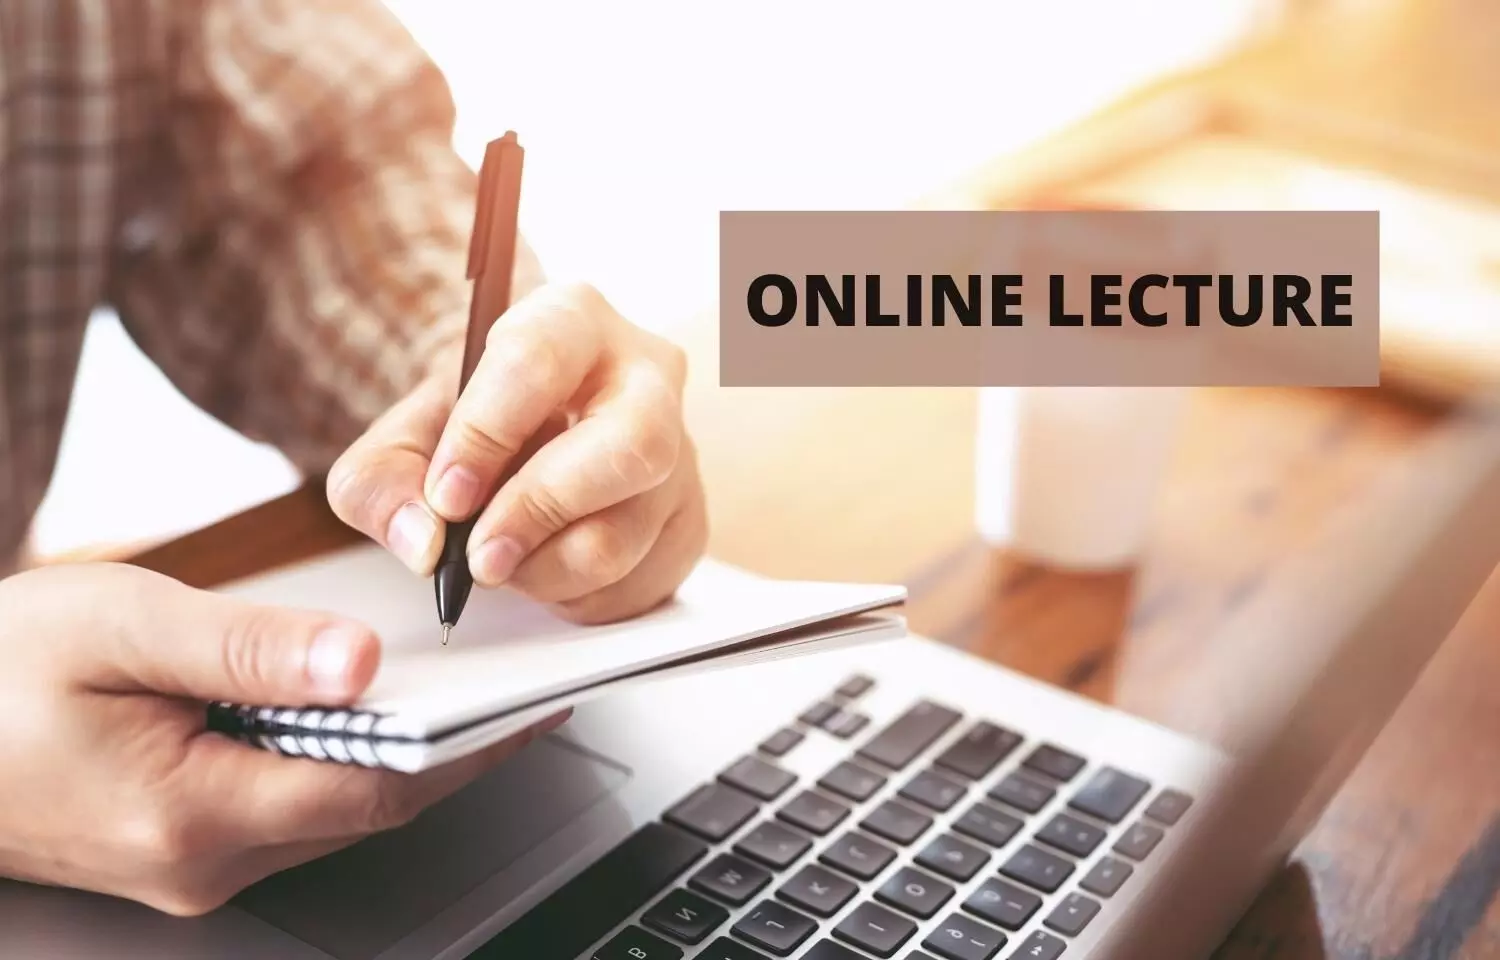 CPS Mumbai releases online lecture series schedule for FCPS Obs- Gyn, DGO Medicine, DGM, DTMH courses, details